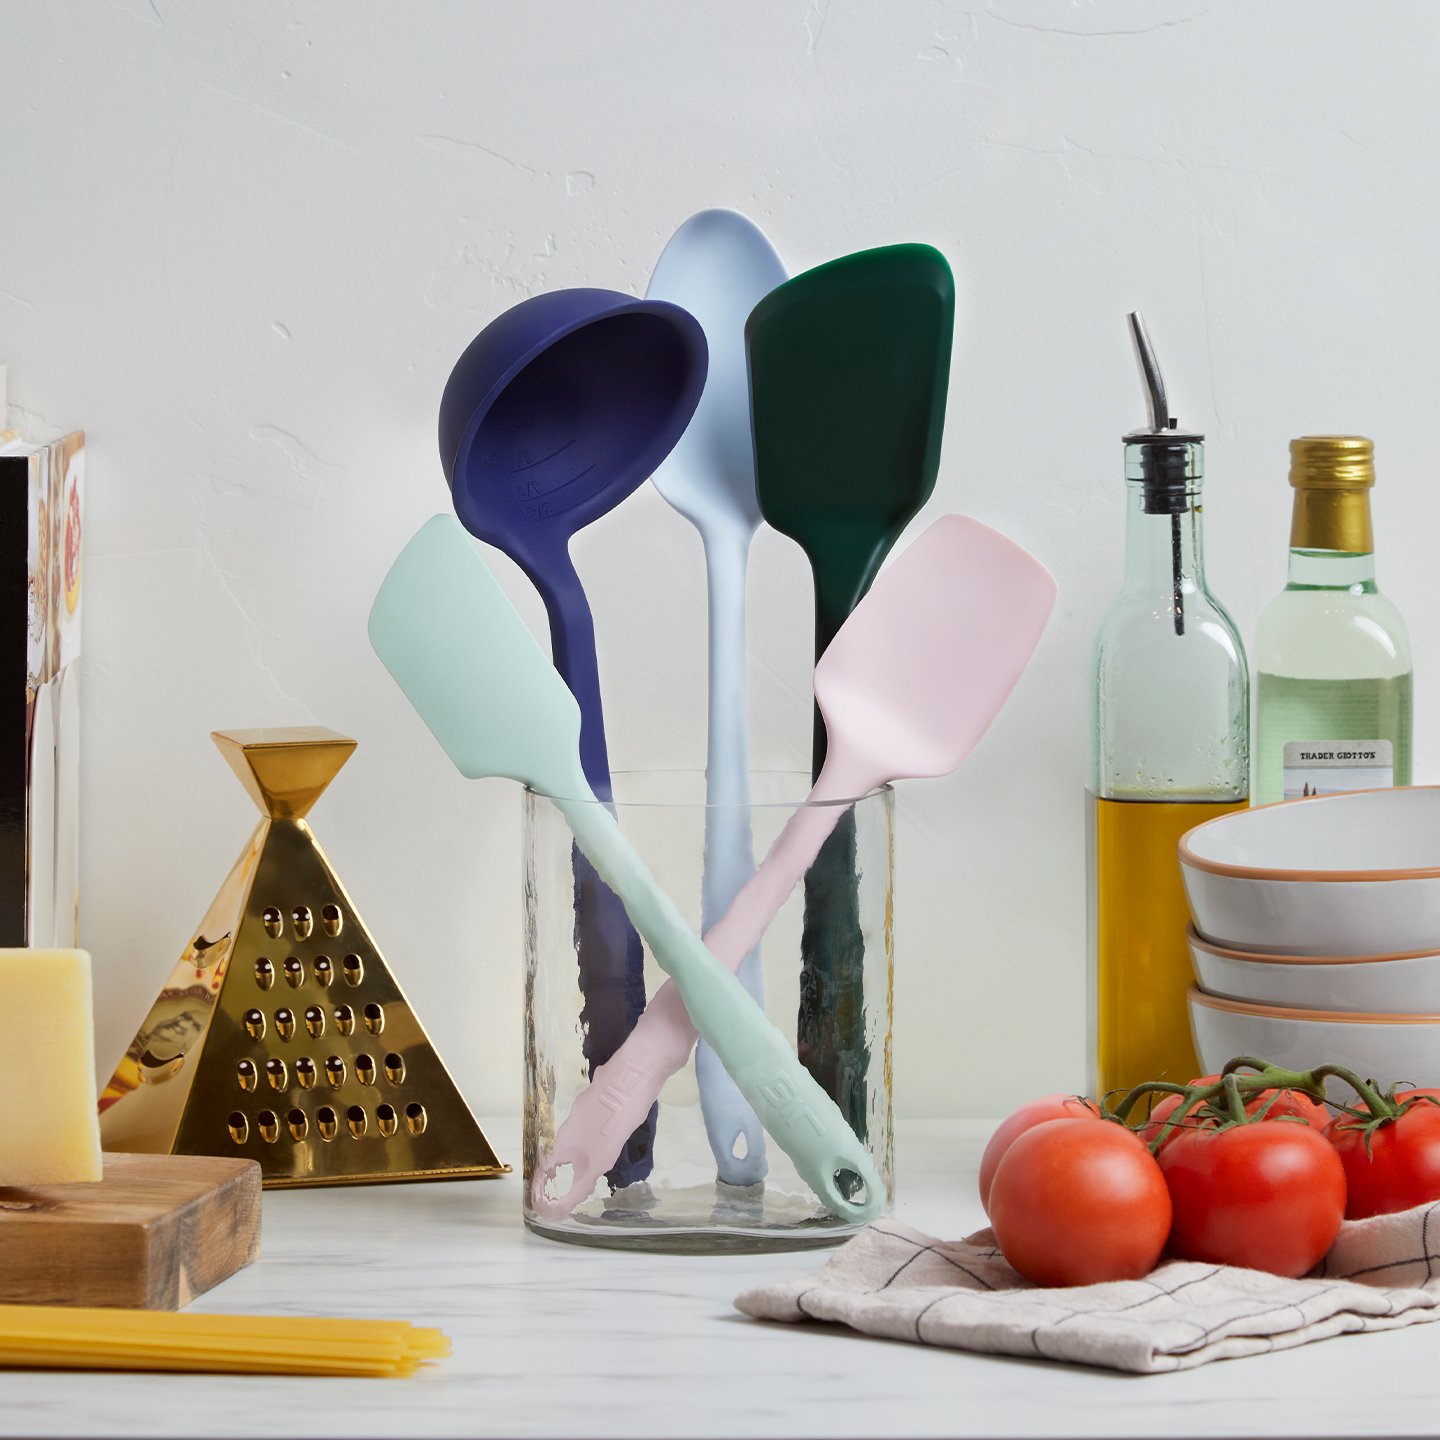 Image for 5 Must Have Kitchen Tools for New Kitchens 